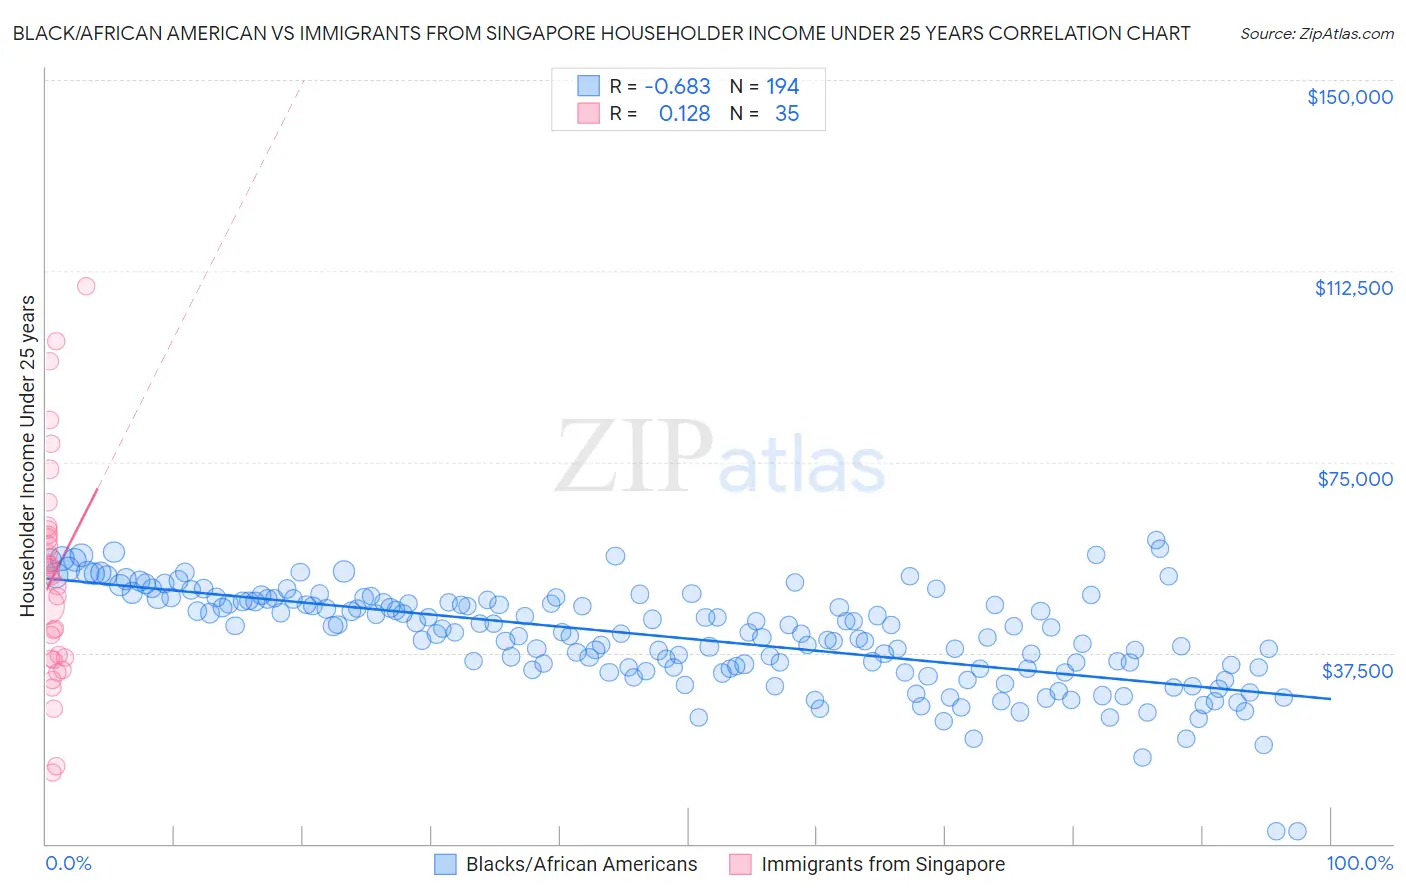 Black/African American vs Immigrants from Singapore Householder Income Under 25 years